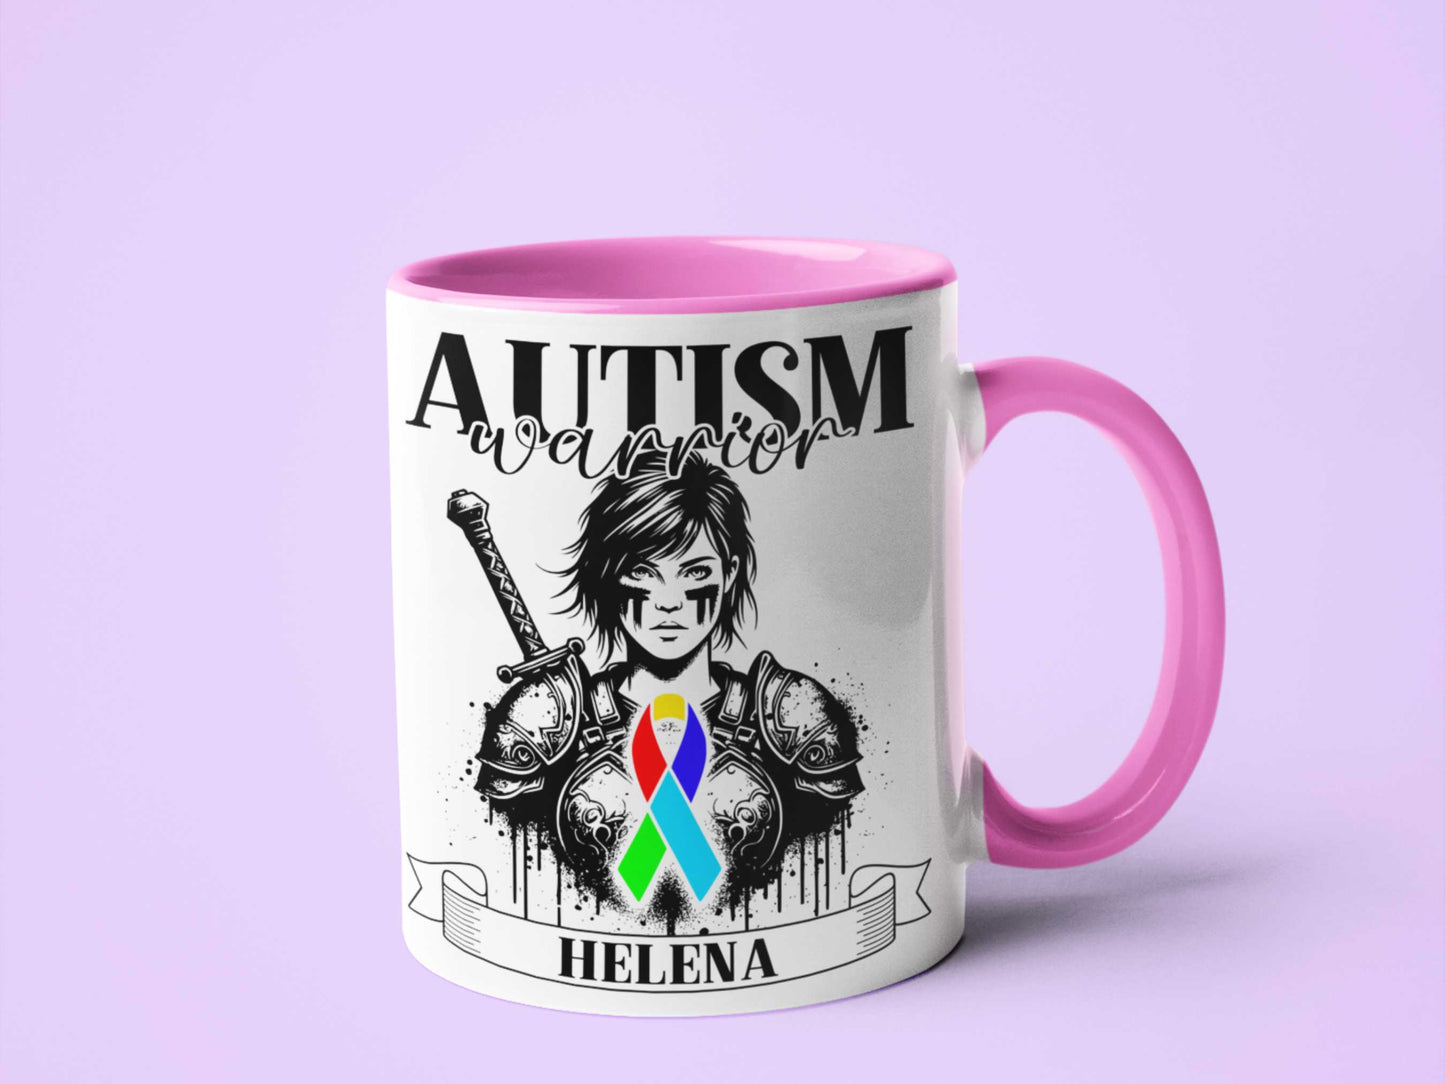 Autism asd Warrior Personalised Mug - A Heartfelt Christmas, Mother's Day, Birthday Gift for Mum, Daughter, Sister, Nan, Auntie & Friends, Celebrating Strength and Awareness